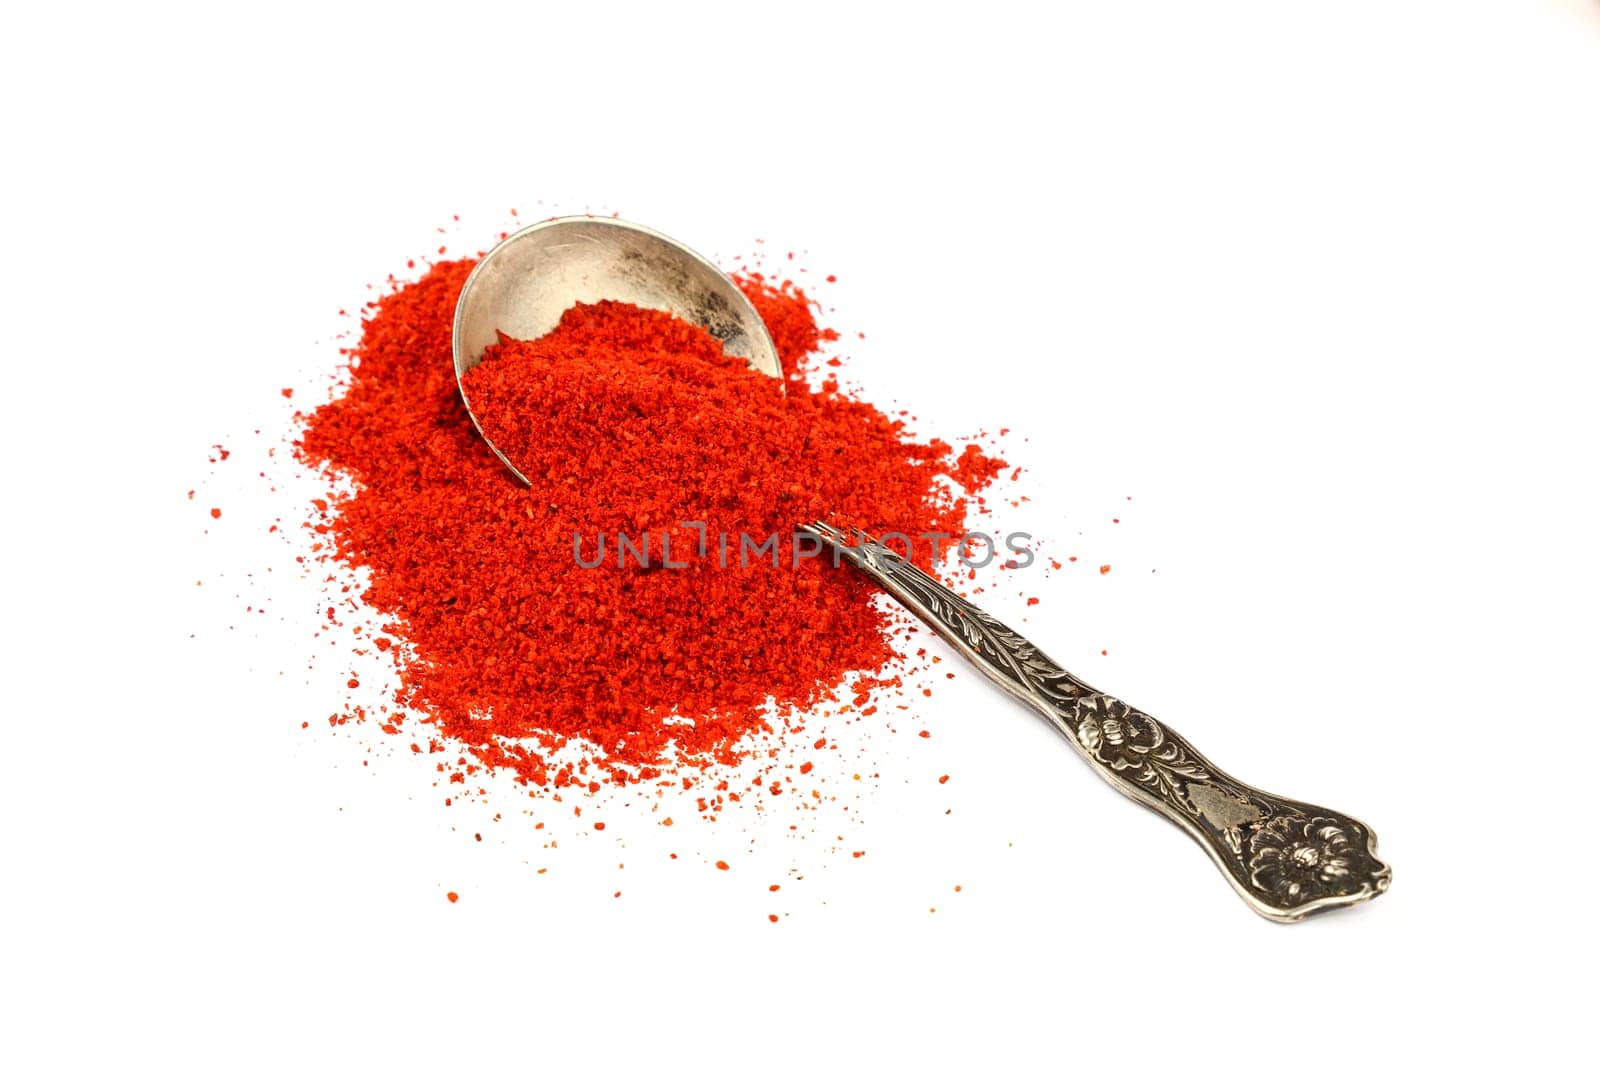 Close up one vintage metal spoon full of red chili pepper, paprika or sundried tomato powder spilled and spread around isolated on white background, elevated top view, directly above